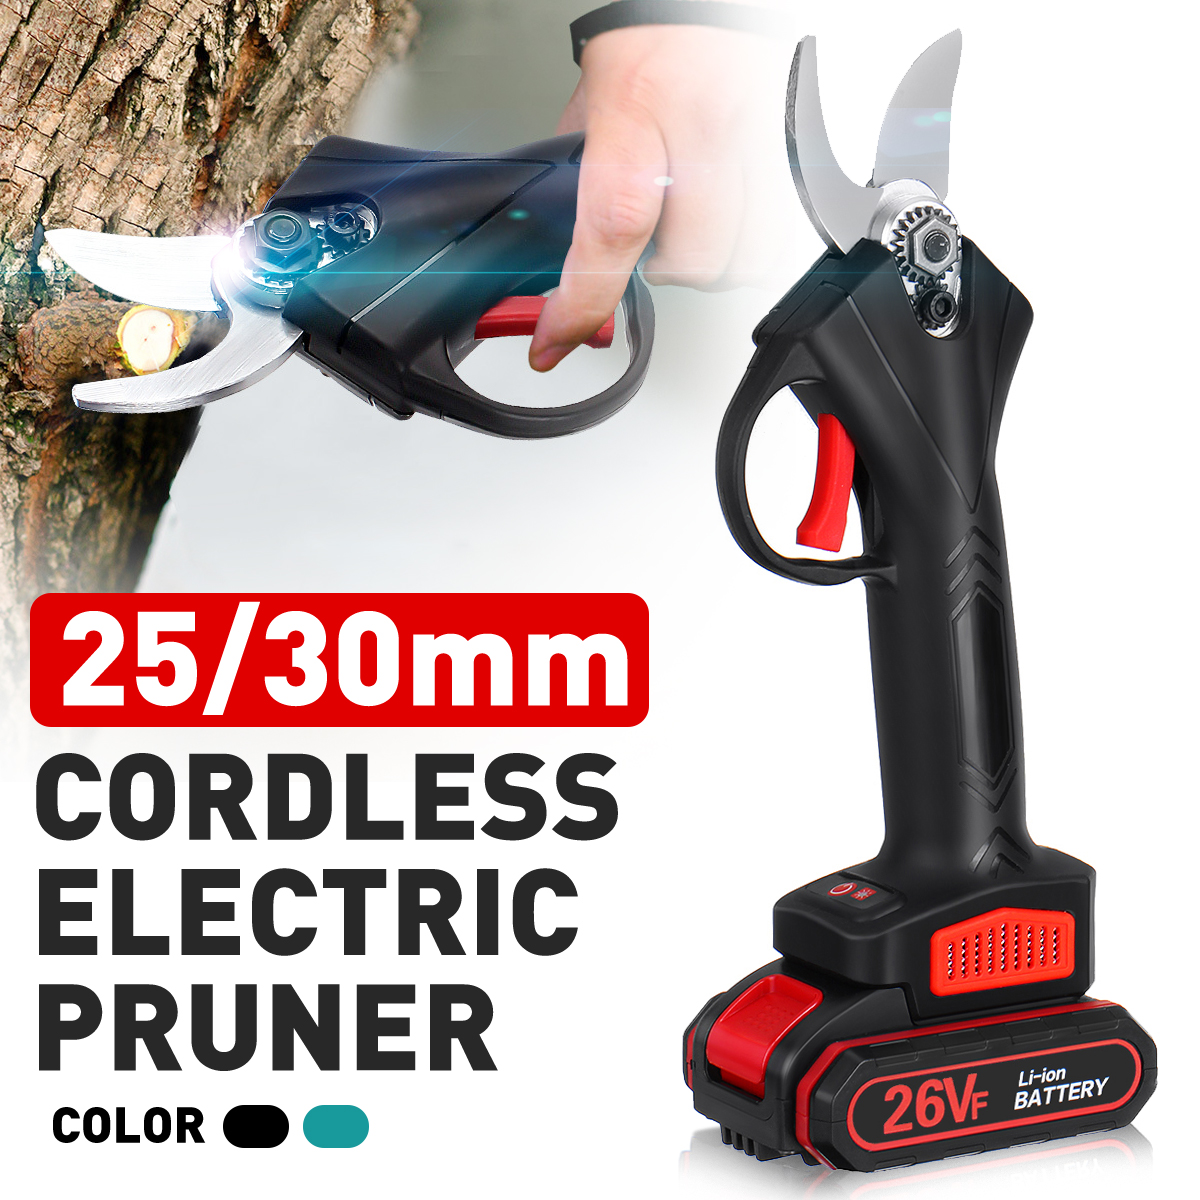 21V-2530mm-Cordless-Electric-Pruning-Secateur-Shears-Portable-Electric-Scissors-W-1pc-Battery-1816359-2